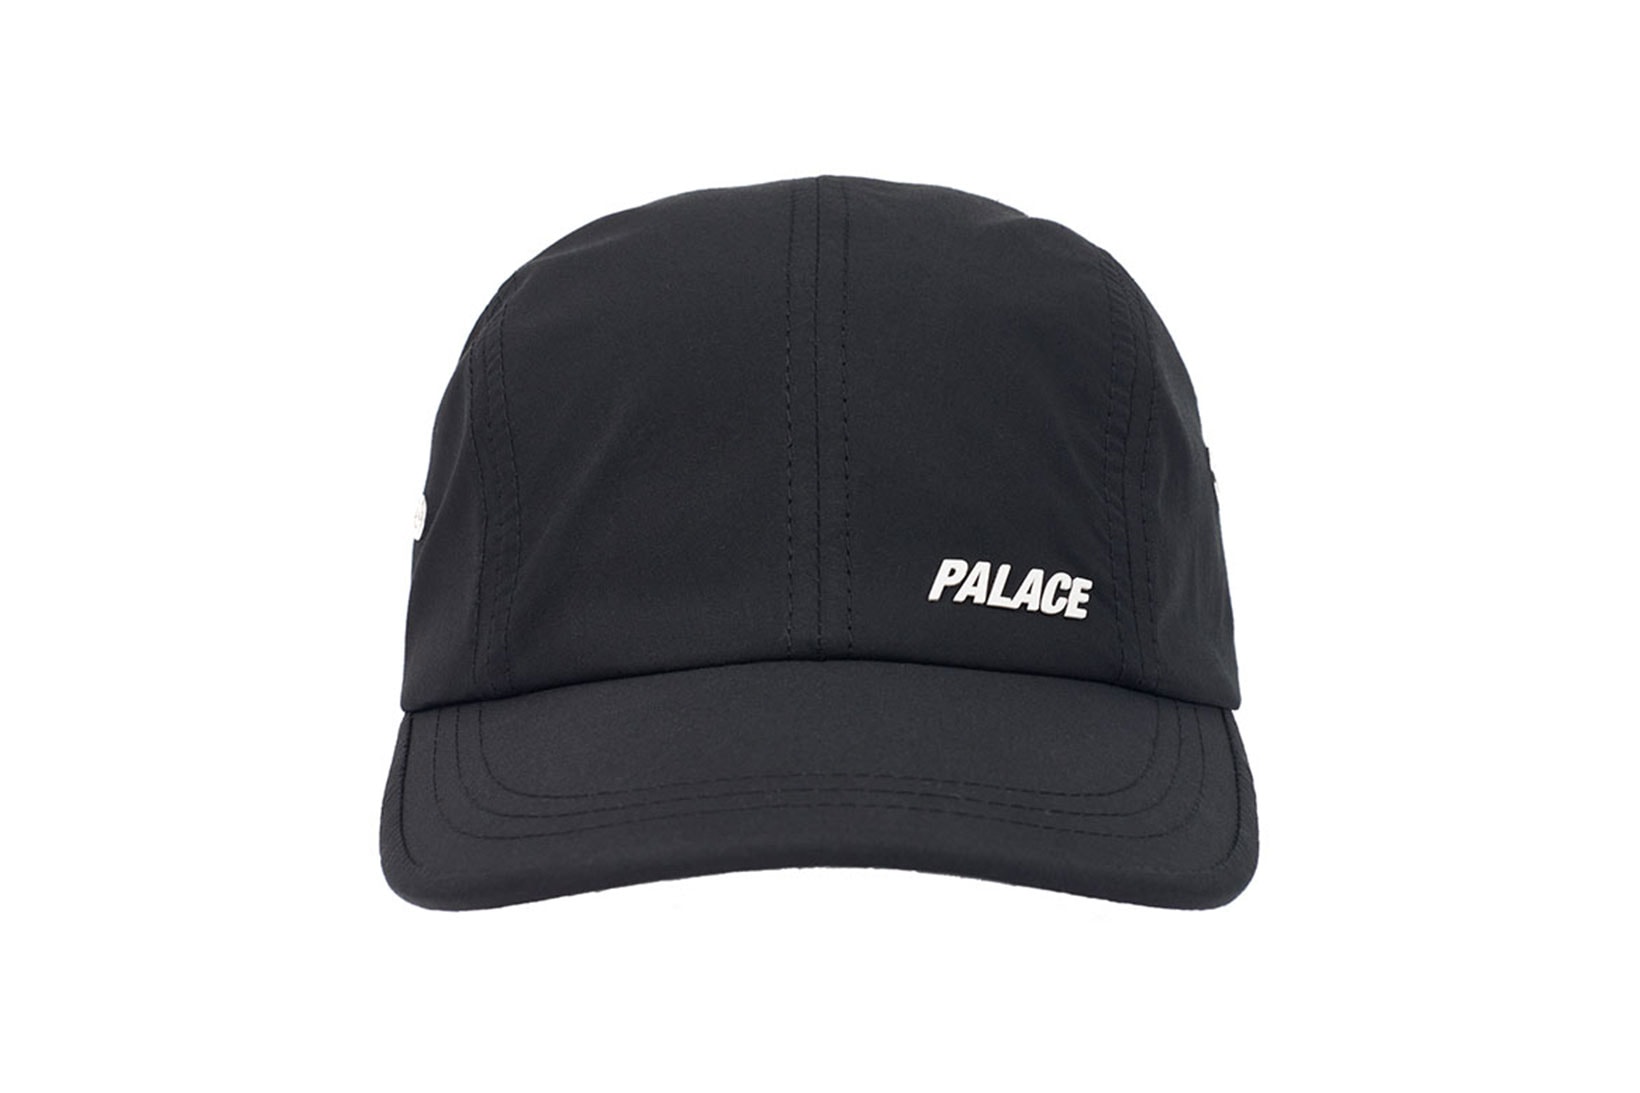 palace spring drop 4 collection logo cap hat graphic